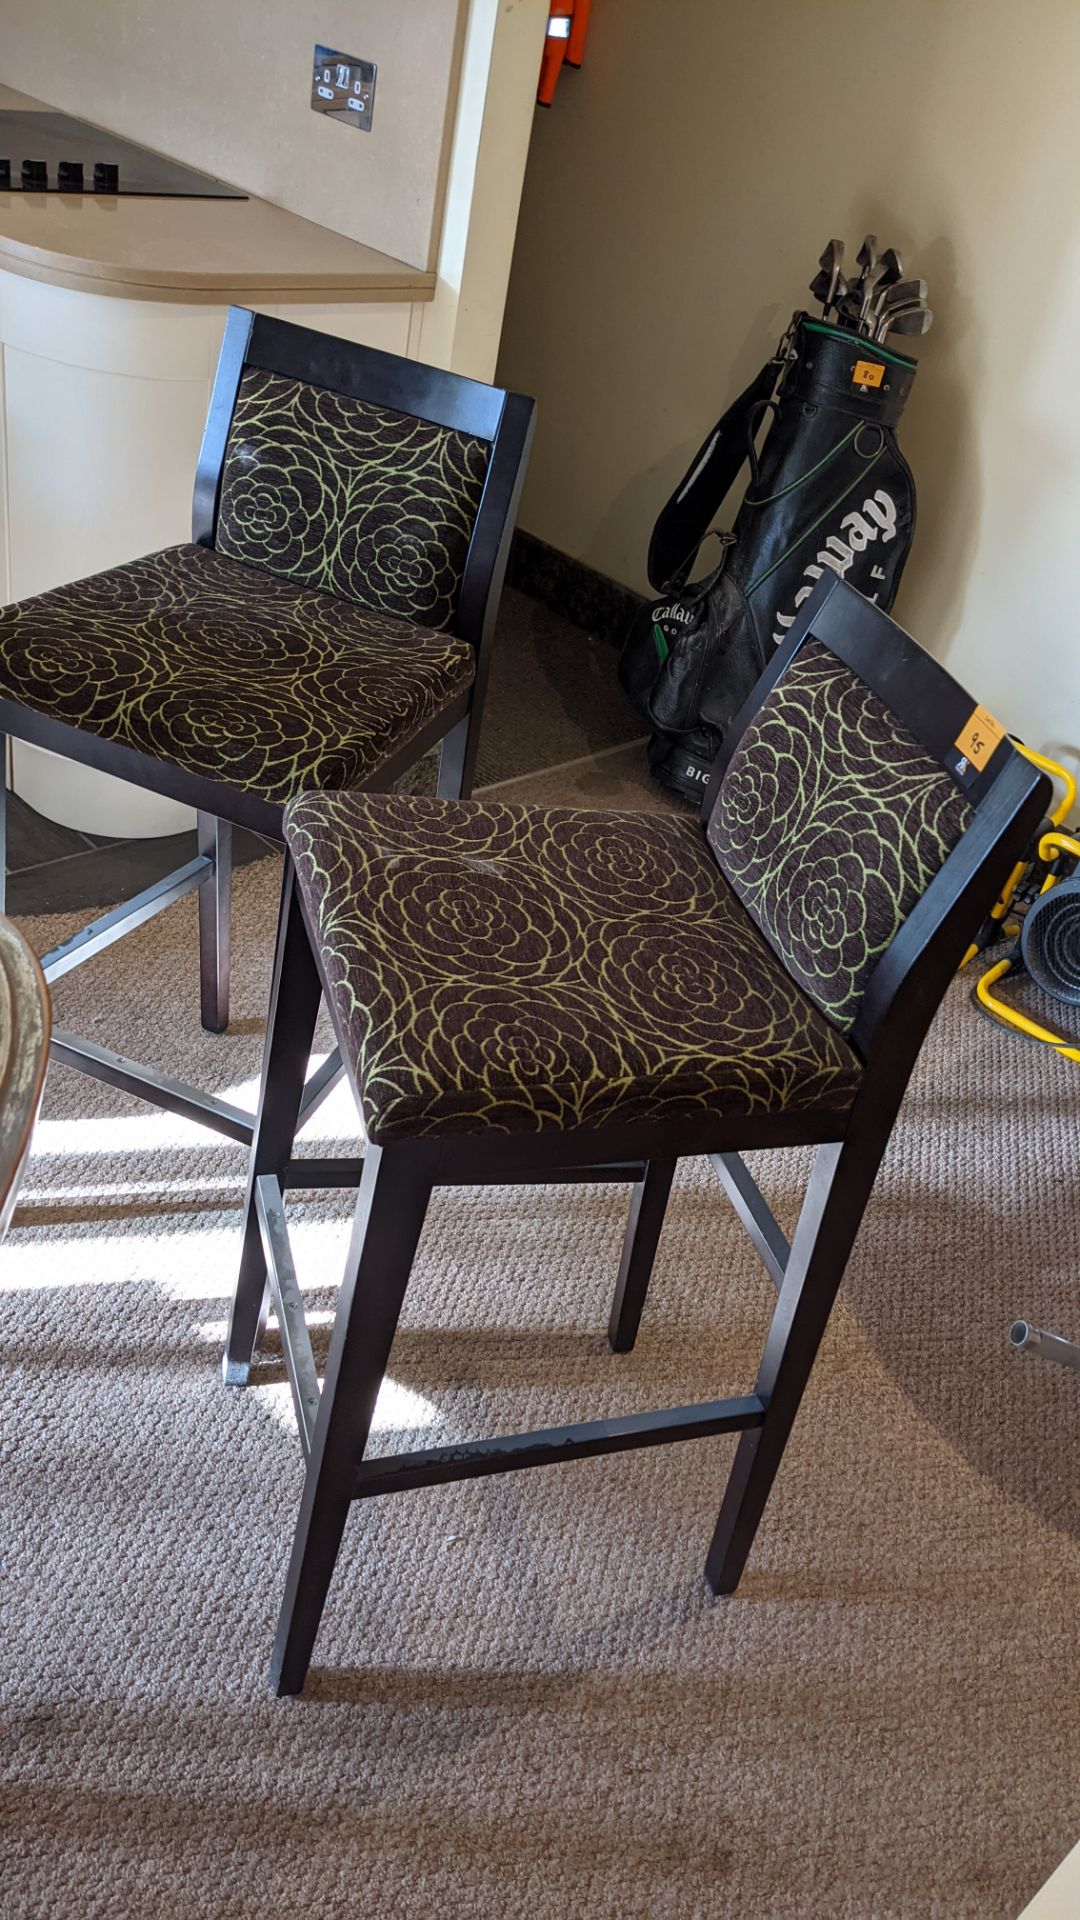 Pair of matching upholstered barstools